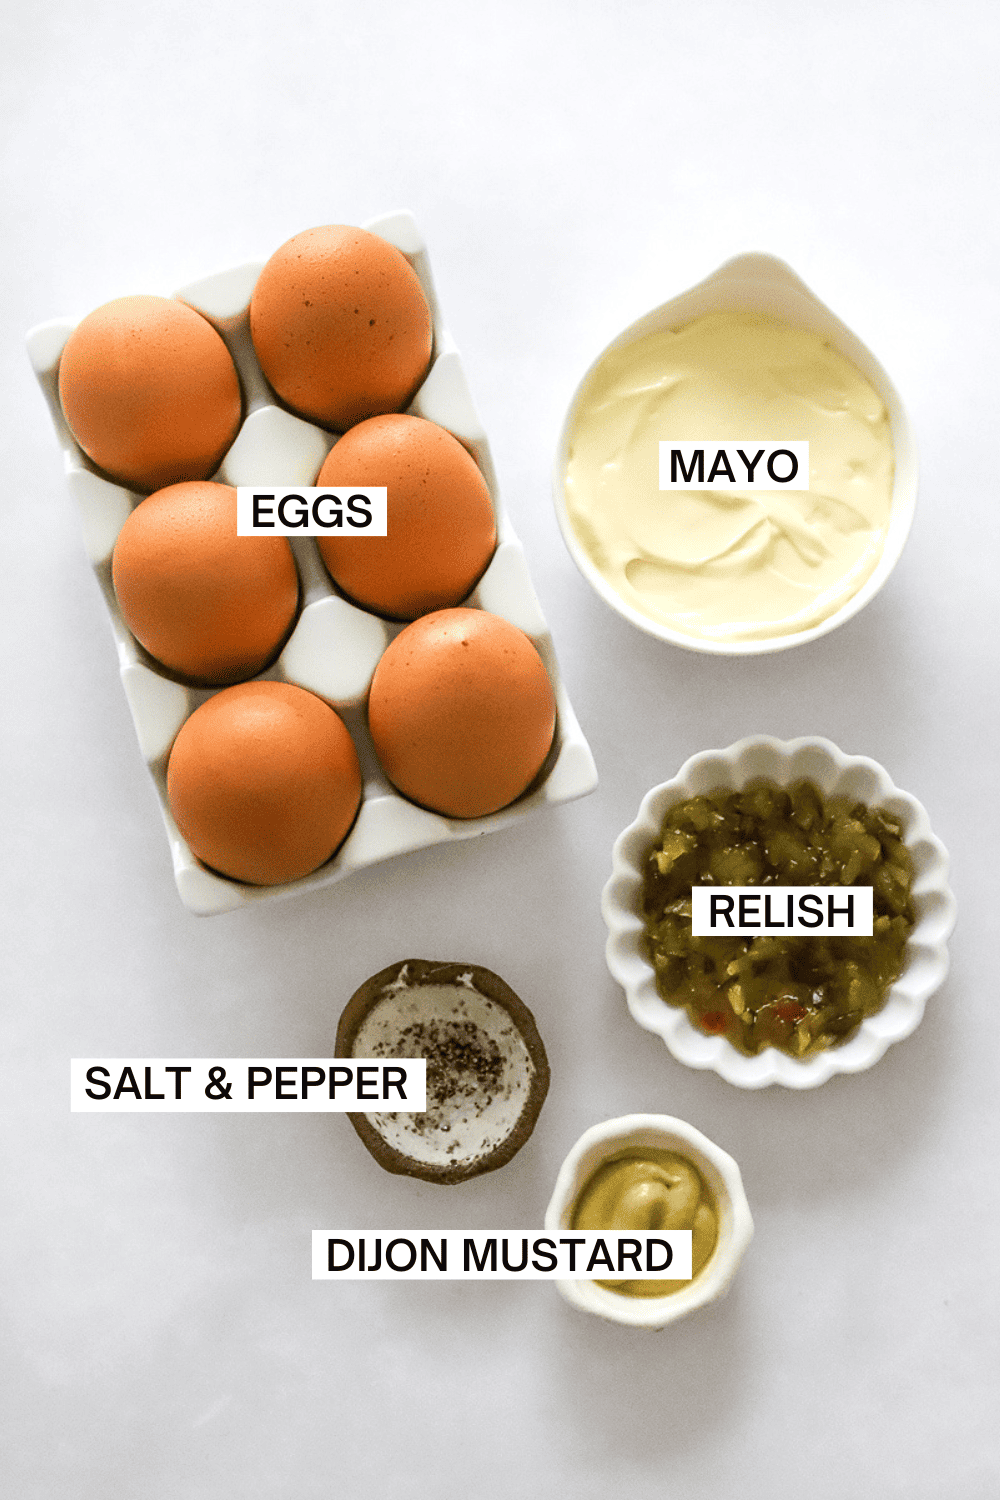 Ingredients for devilled eggs with relish - with labels